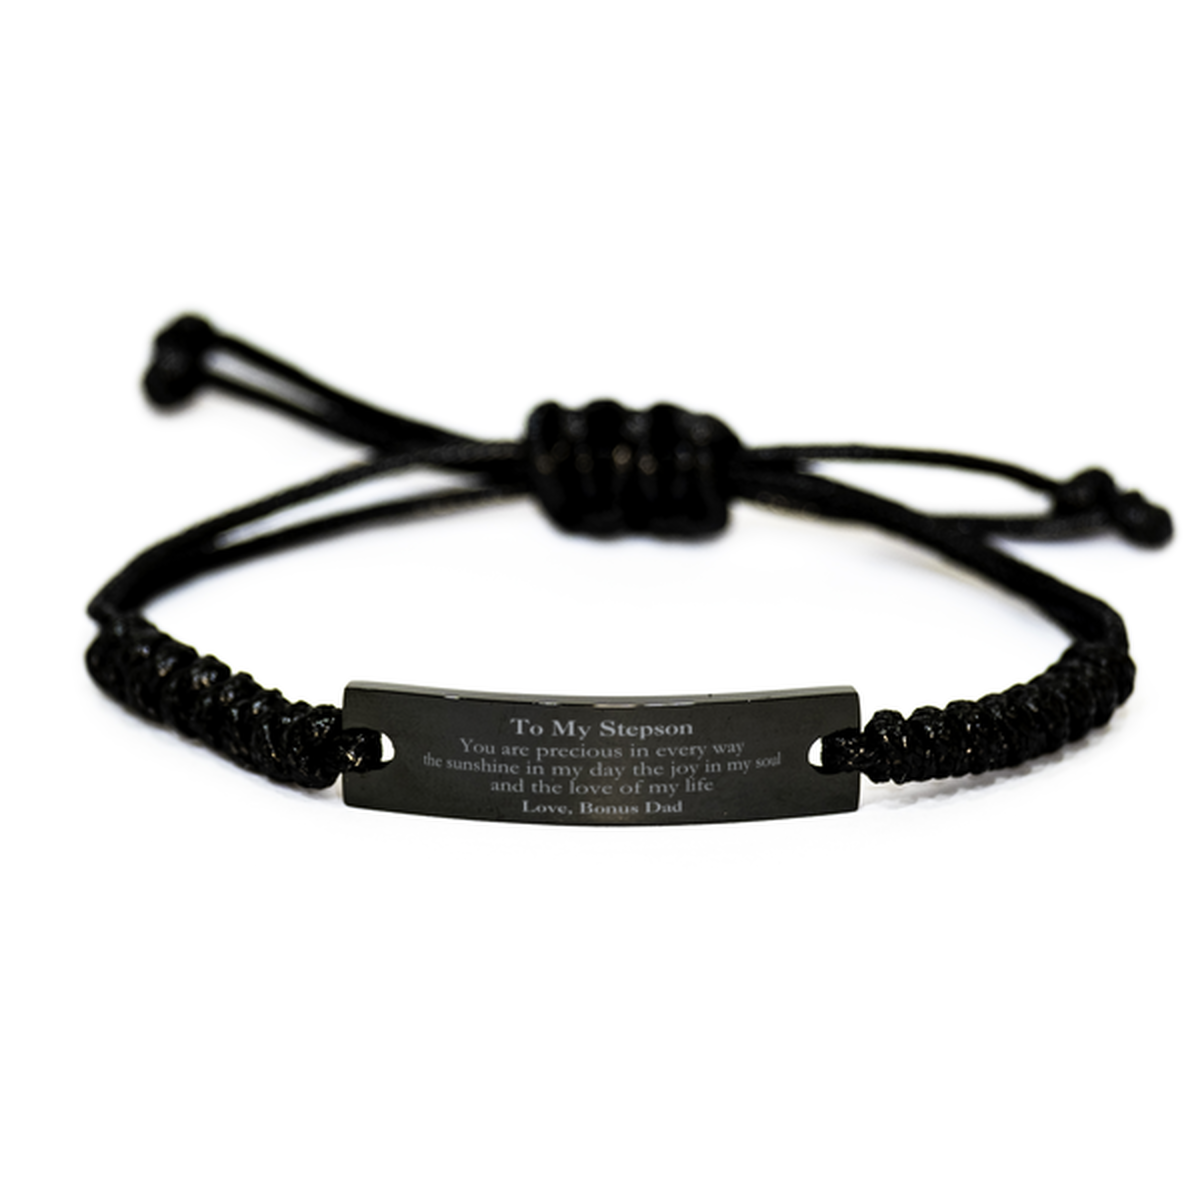 Graduation Gifts for Stepson Black Rope Bracelet Present from Bonus Dad, Christmas Stepson Birthday Gifts Stepson You are precious in every way the sunshine in my day. Love, Bonus Dad